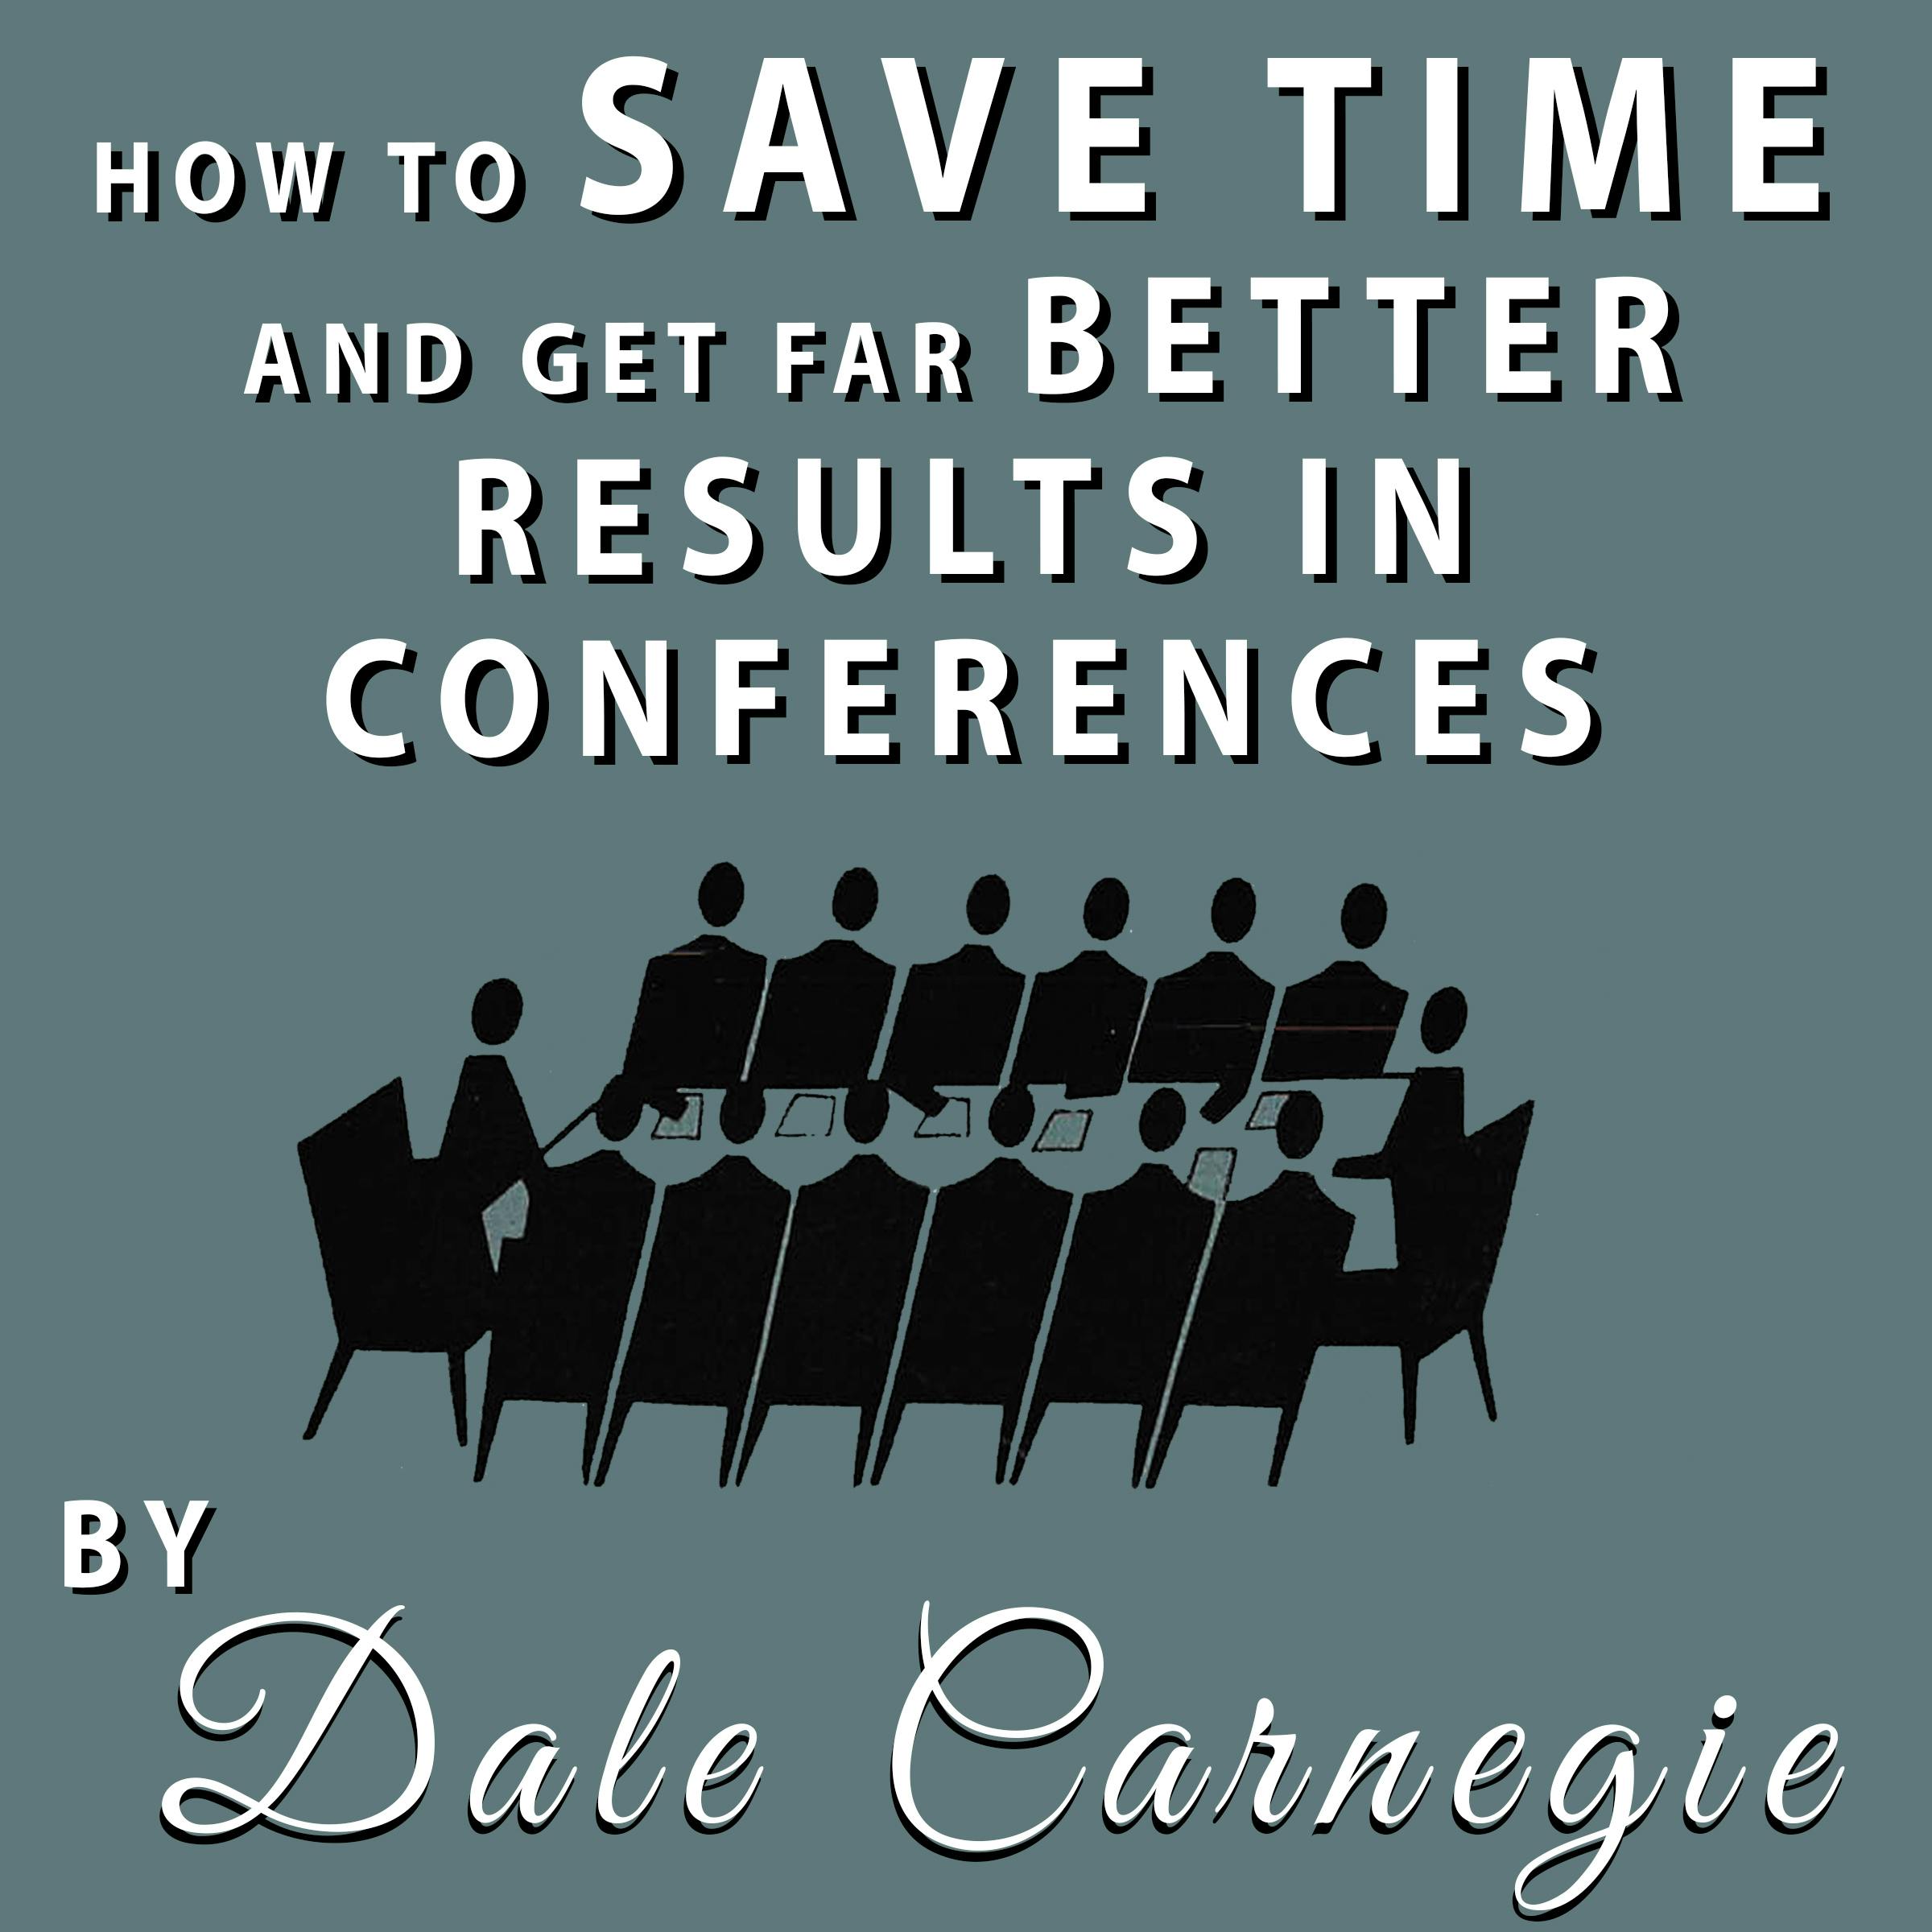 How to Save Time and Get Far Better Results in Conferences - undefined